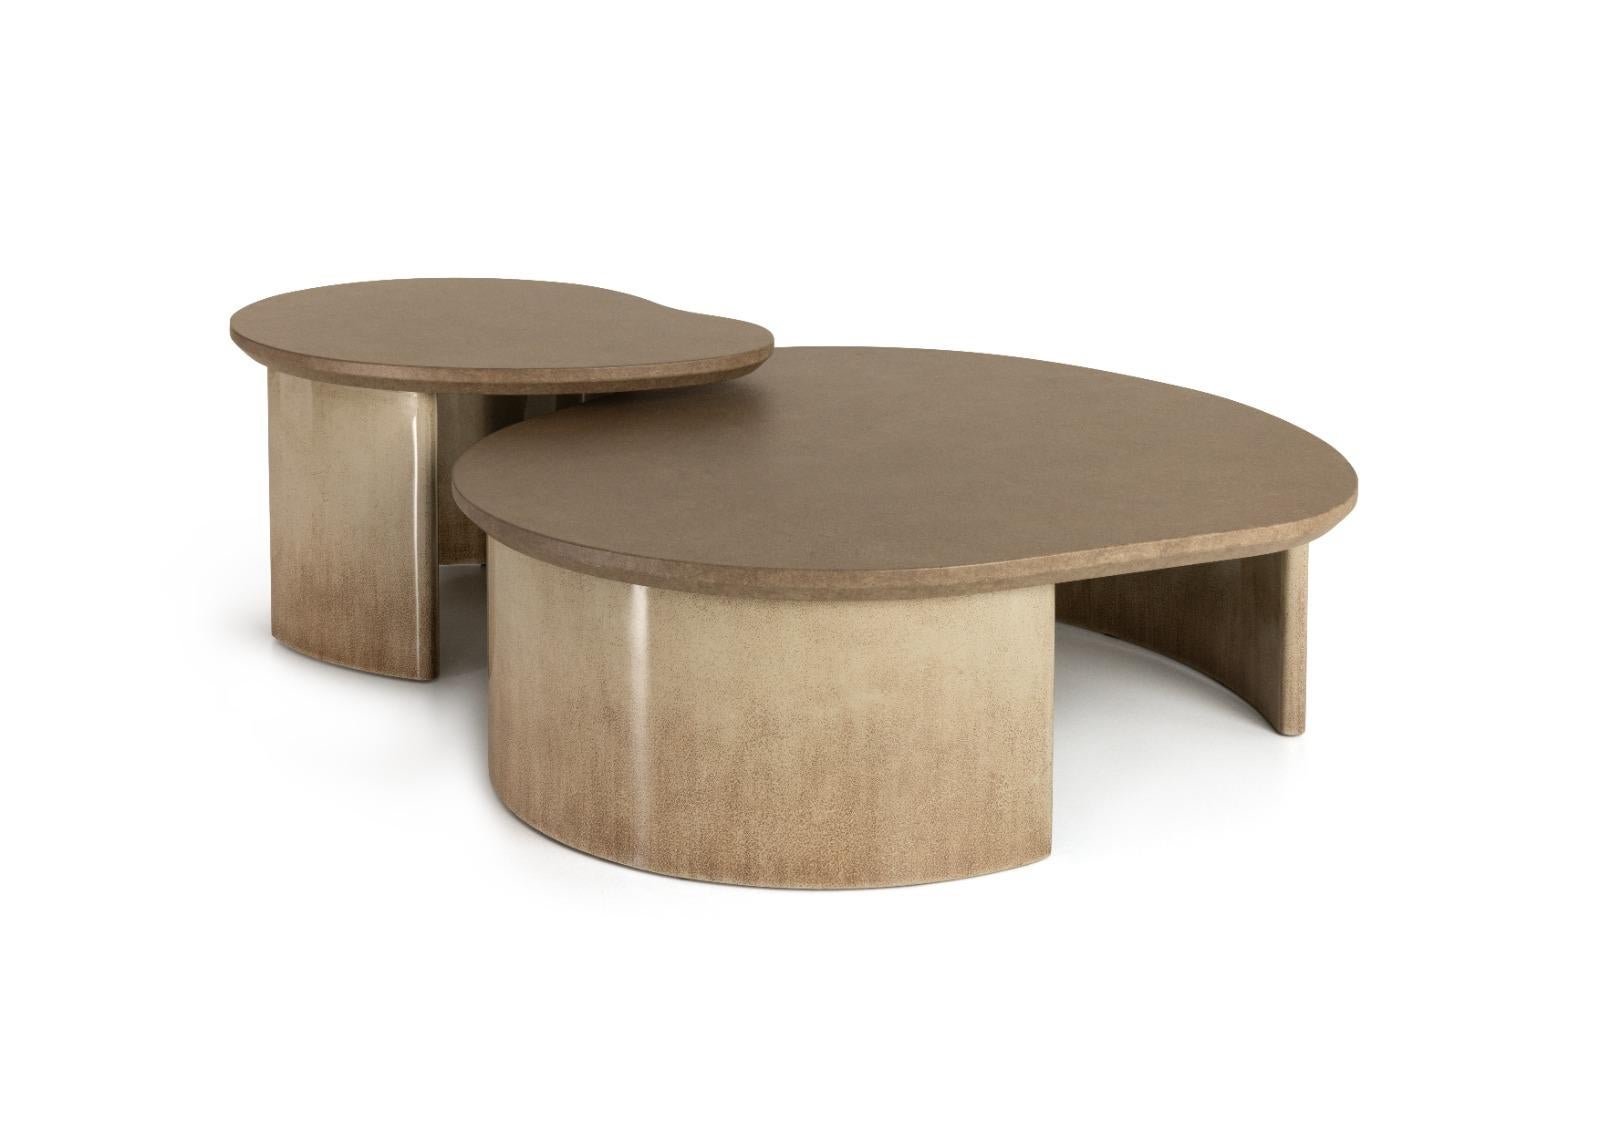 Lacquered Amorphous Taş Large Coffee Table by Ekin Varon For Sale